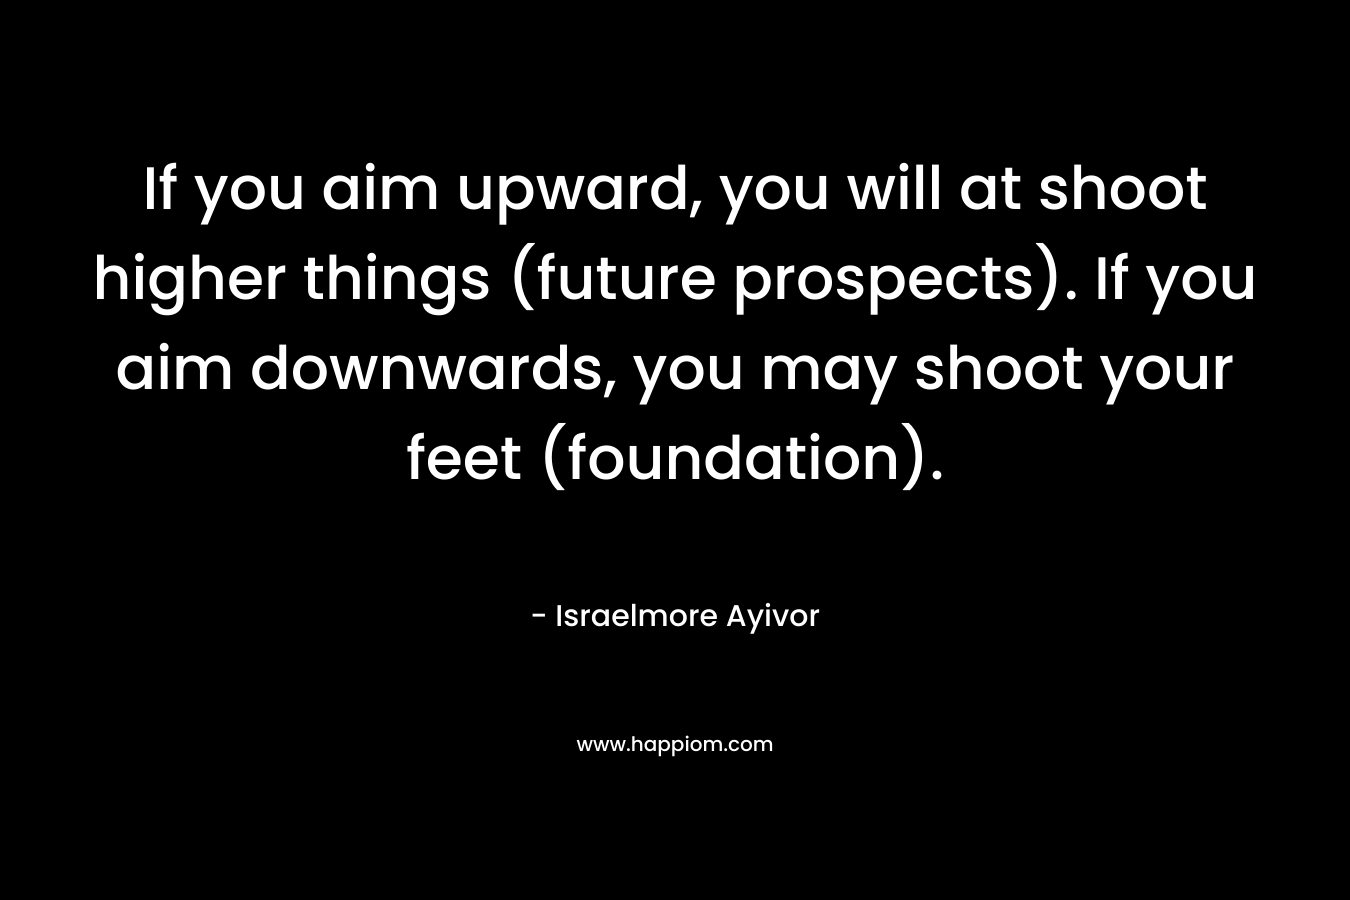 If you aim upward, you will at shoot higher things (future prospects). If you aim downwards, you may shoot your feet (foundation).